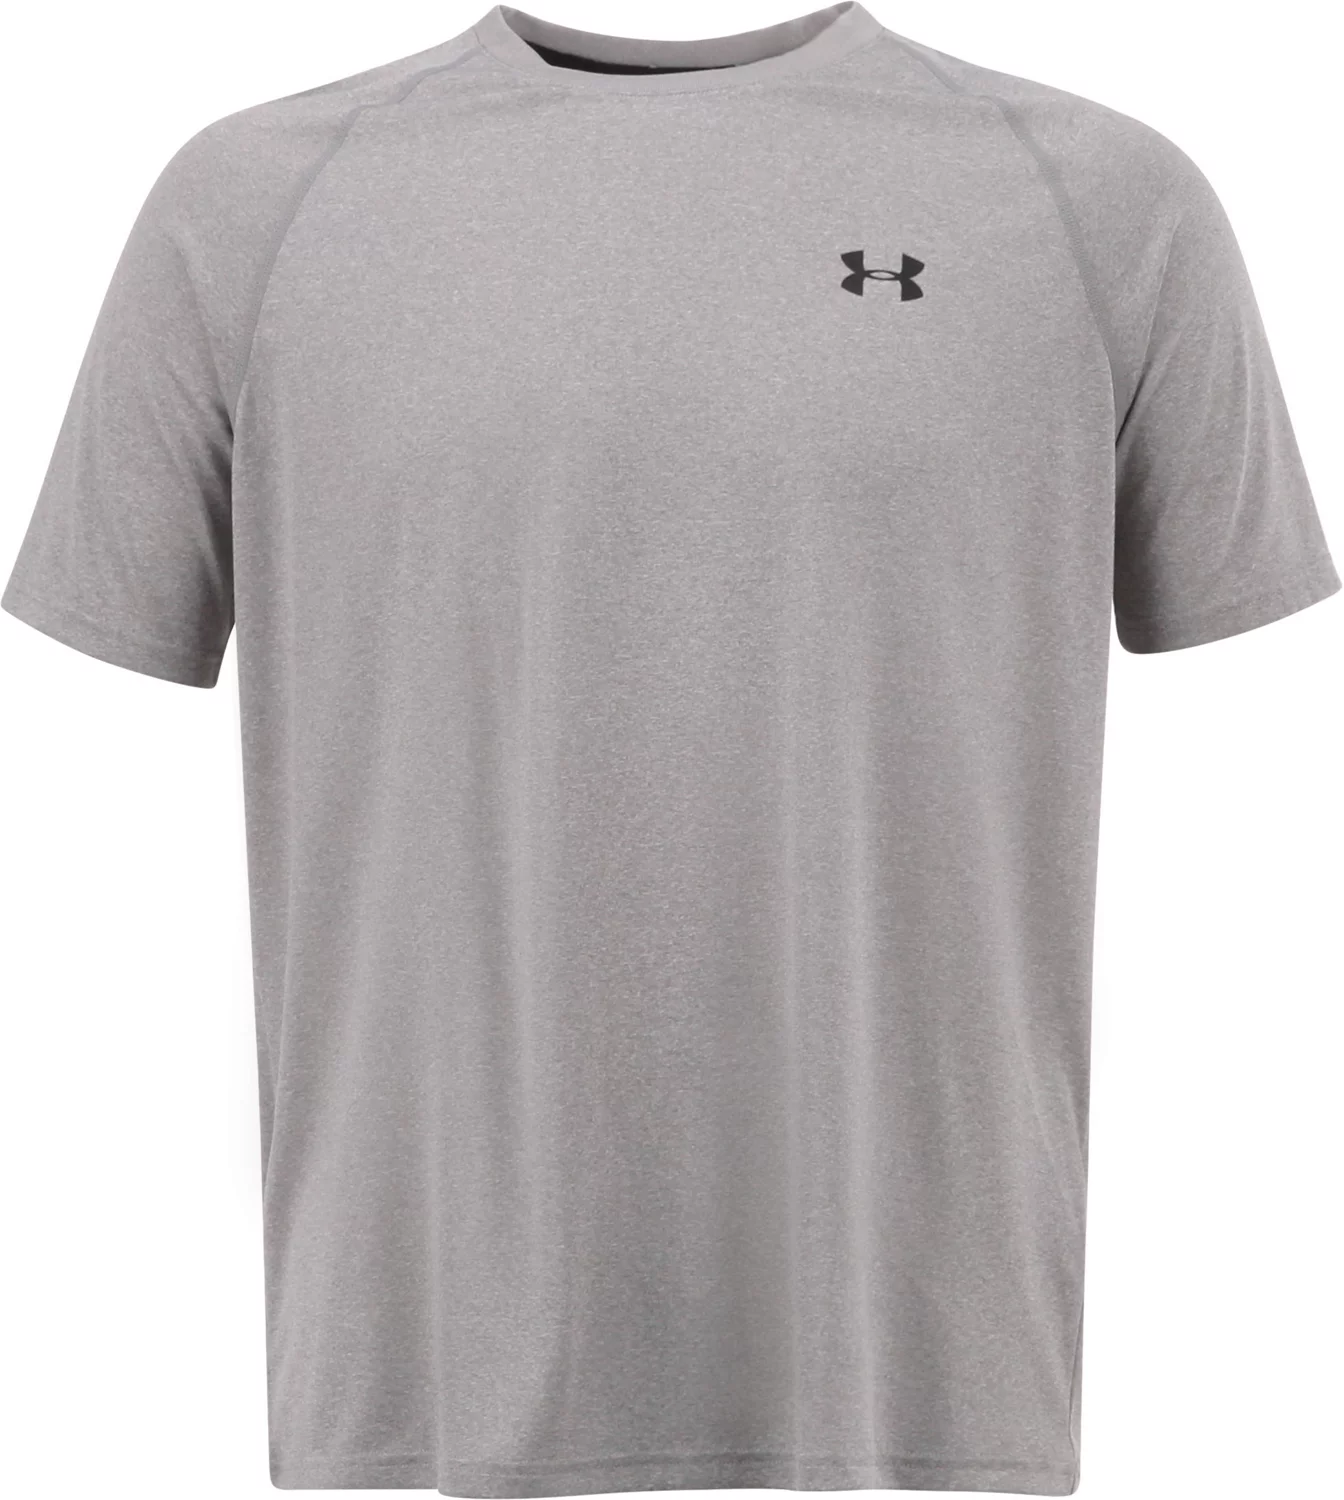 under armour clearance shirts